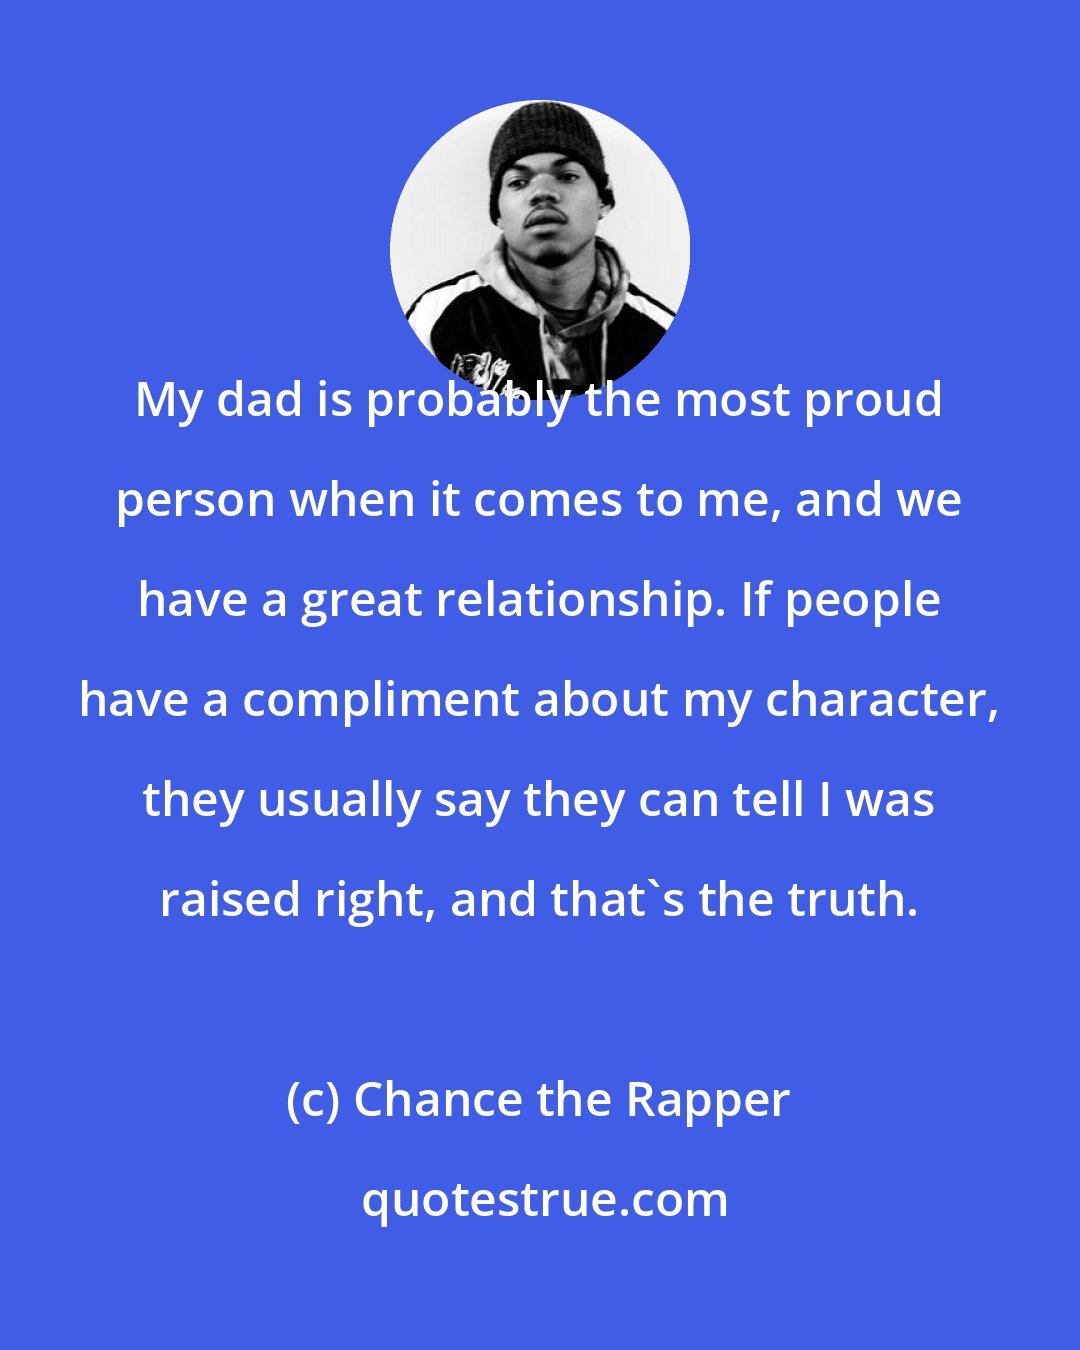 Chance the Rapper: My dad is probably the most proud person when it comes to me, and we have a great relationship. If people have a compliment about my character, they usually say they can tell I was raised right, and that's the truth.